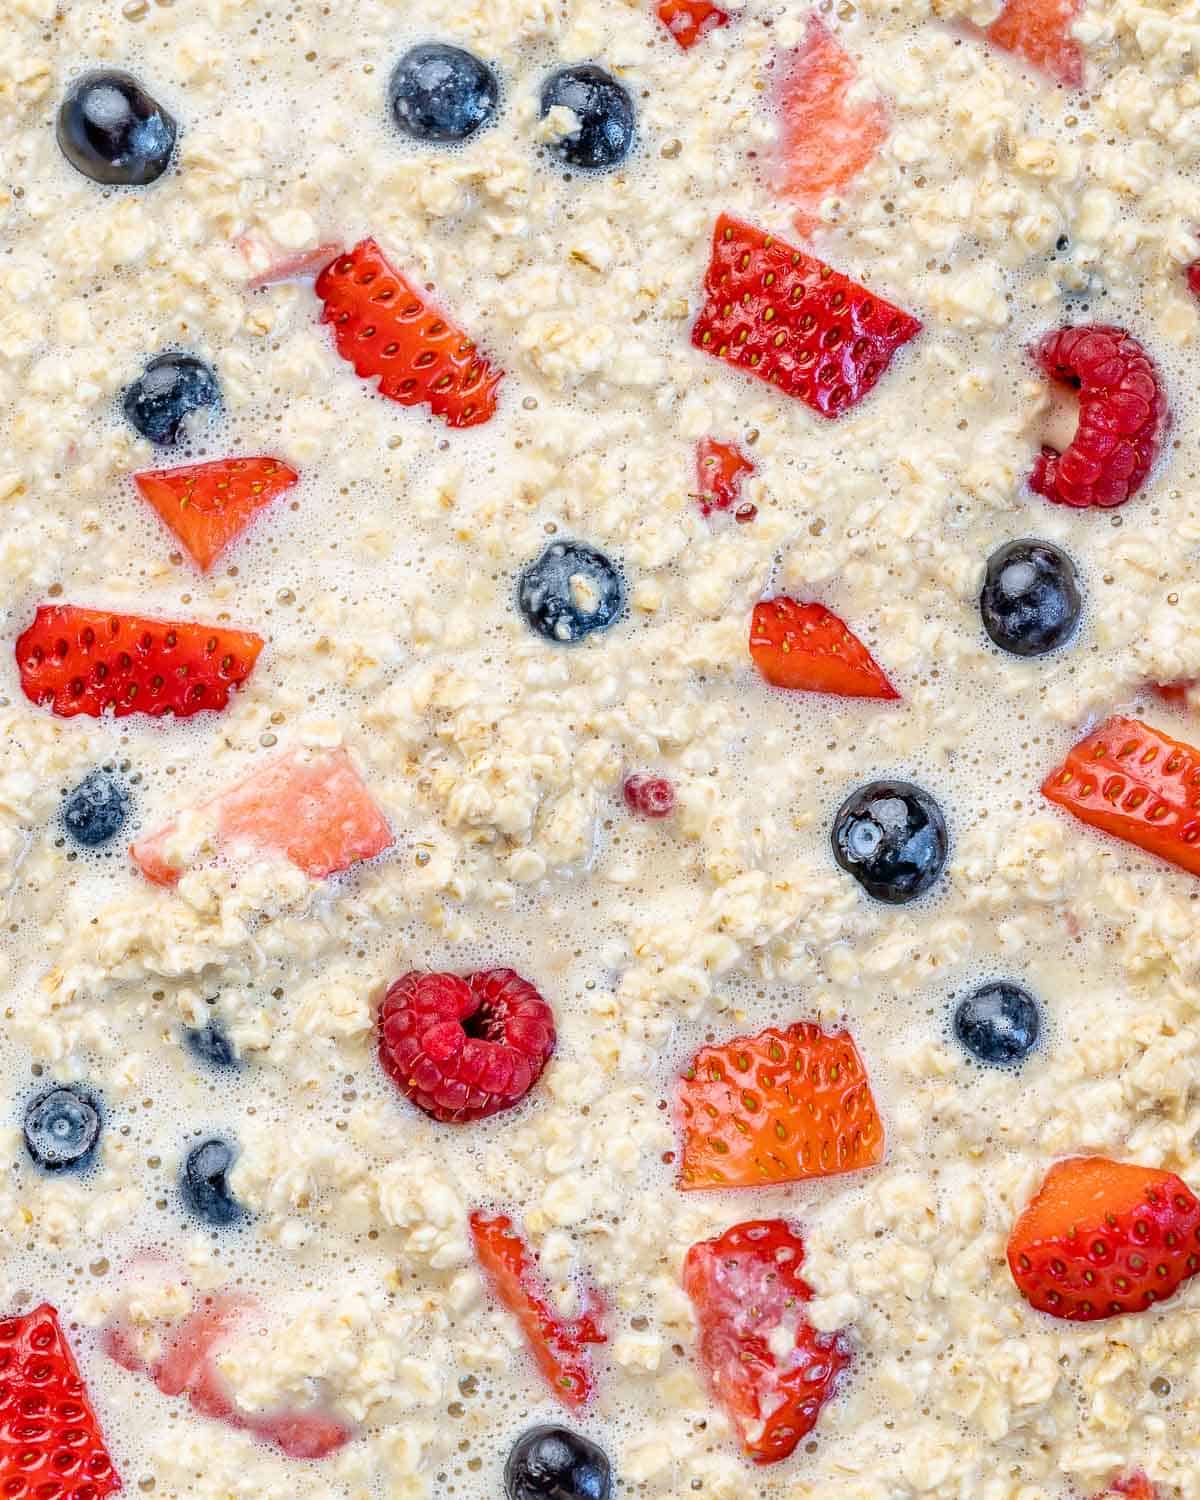 raw oatmeal mixture with berries before baking